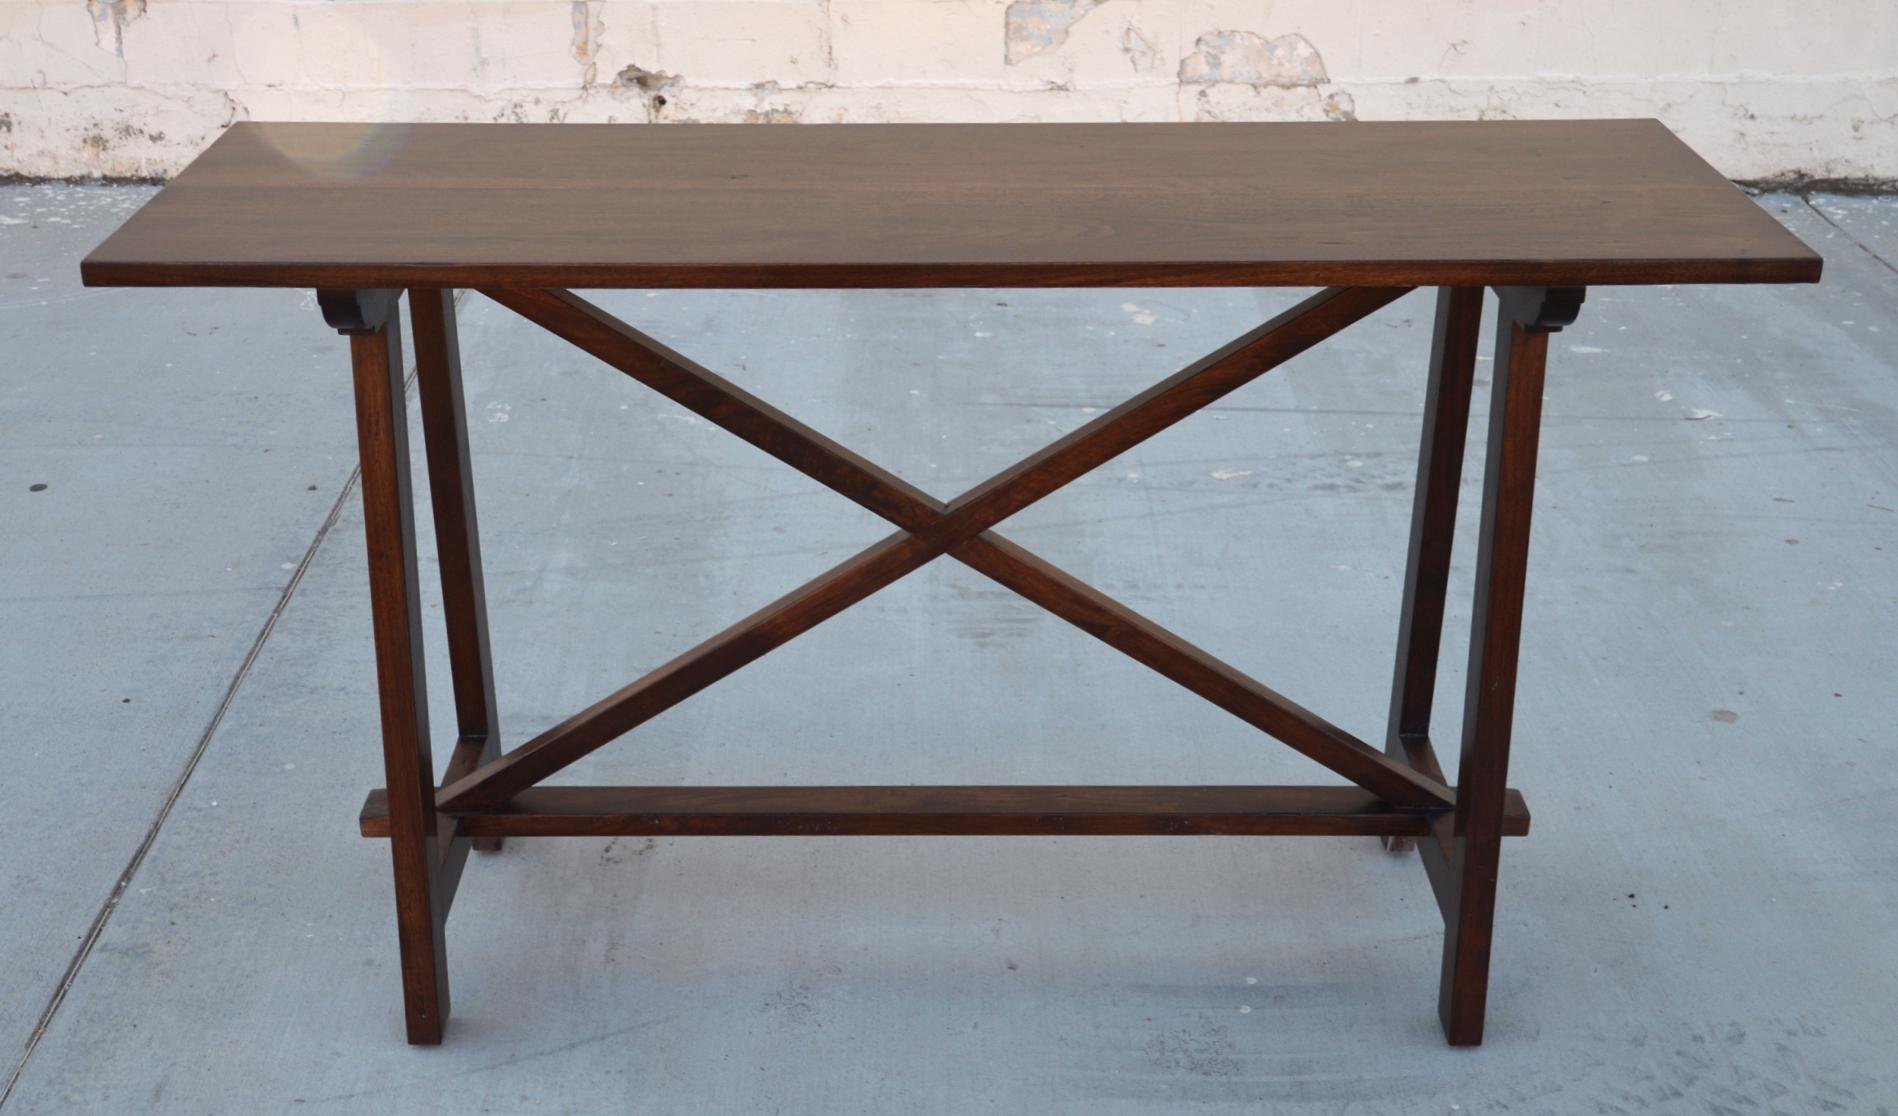 This walnut console table is seen here in 60